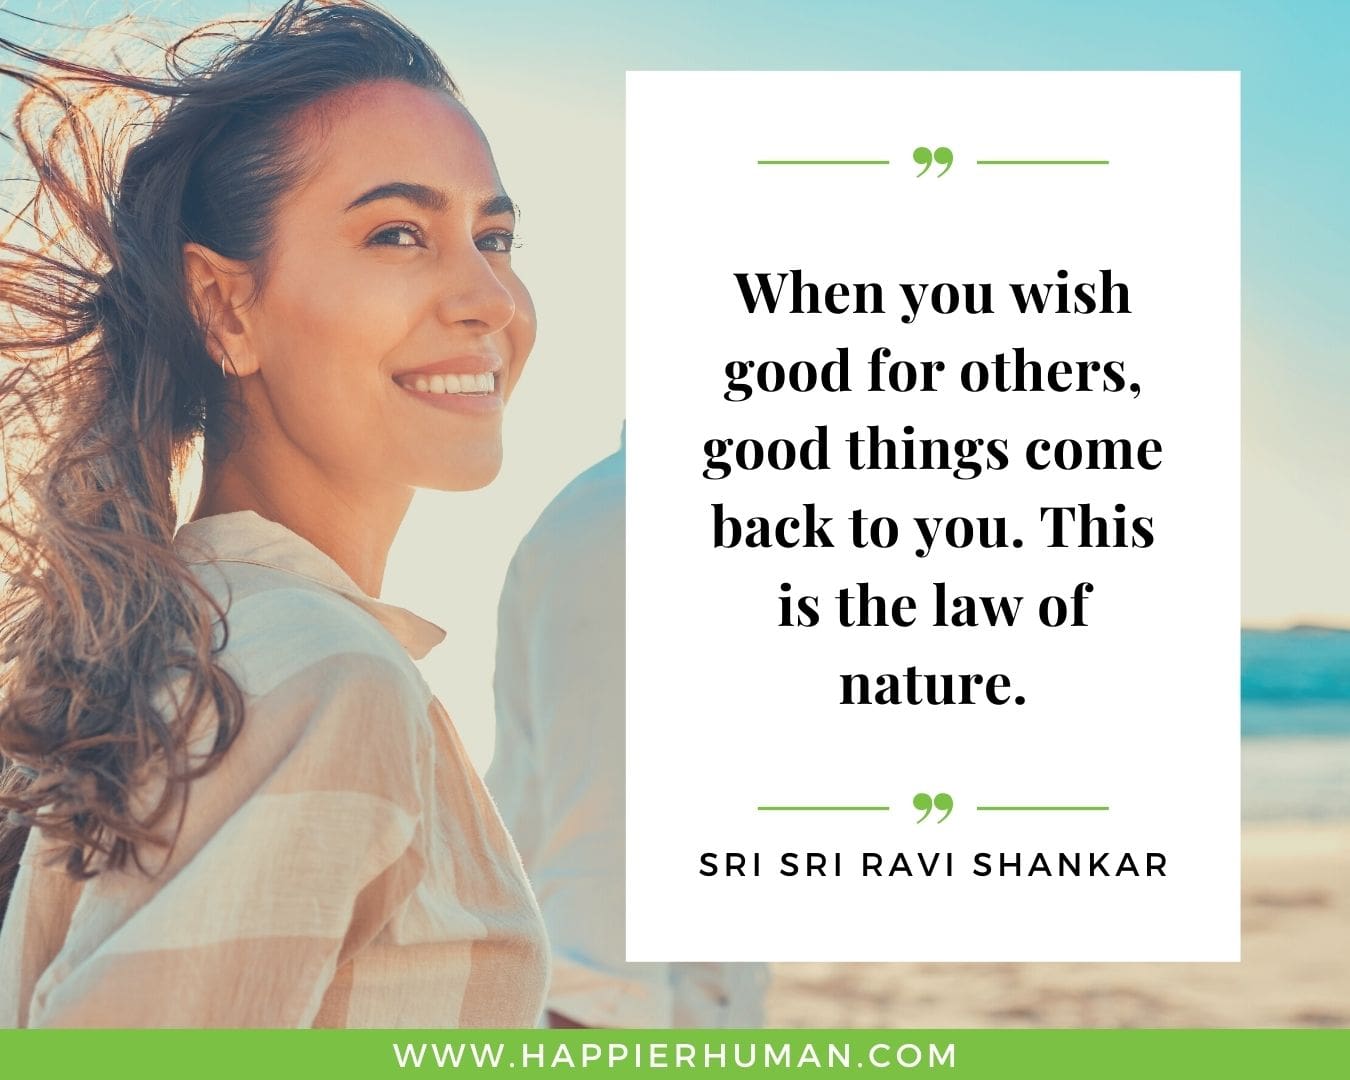 Positive Energy Quotes - “When you wish good for others, good things come back to you. This is the law of nature.” - Sri Sri Ravi Shankar